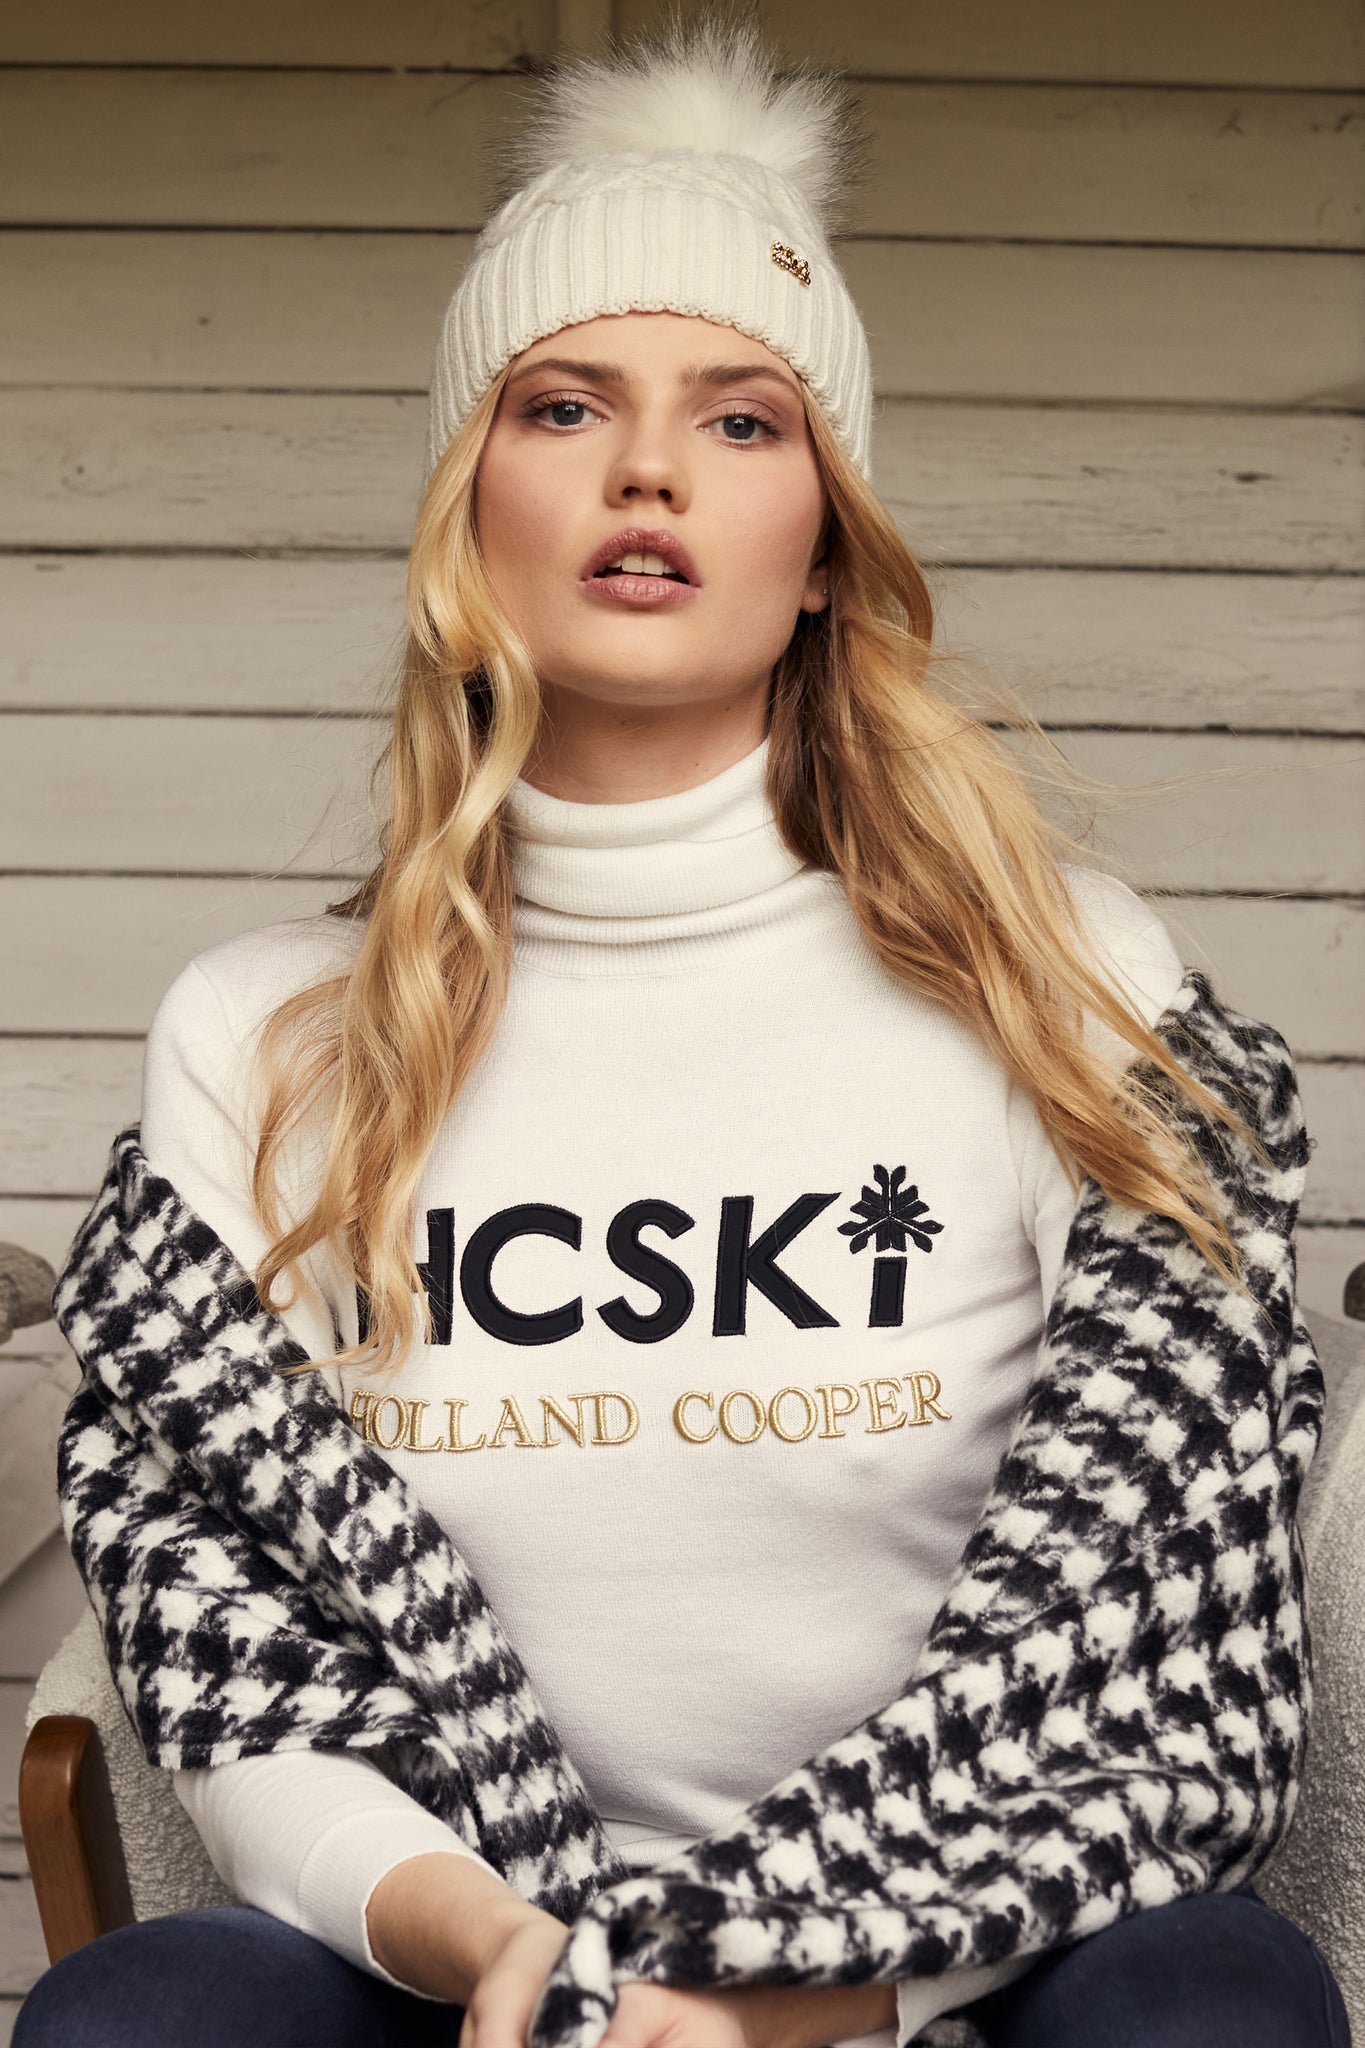 thermal fitted roll neck jumper in white with black and gold HC Ski branding in a high build embroidery across front